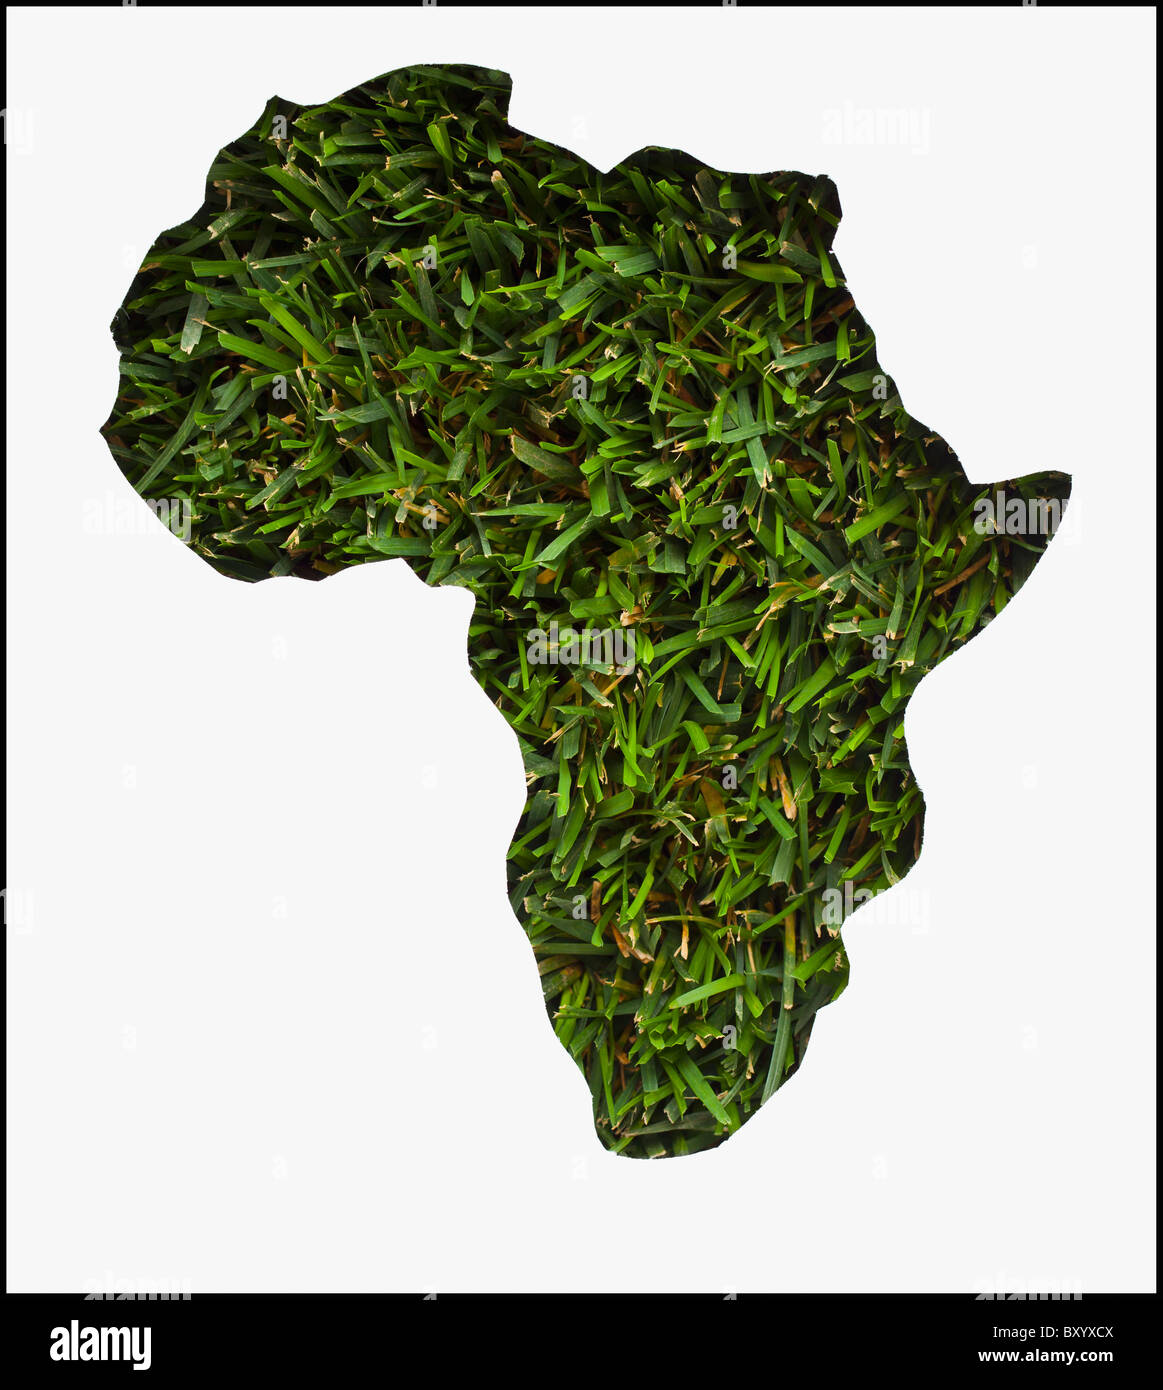 Africa map made from grass Stock Photo